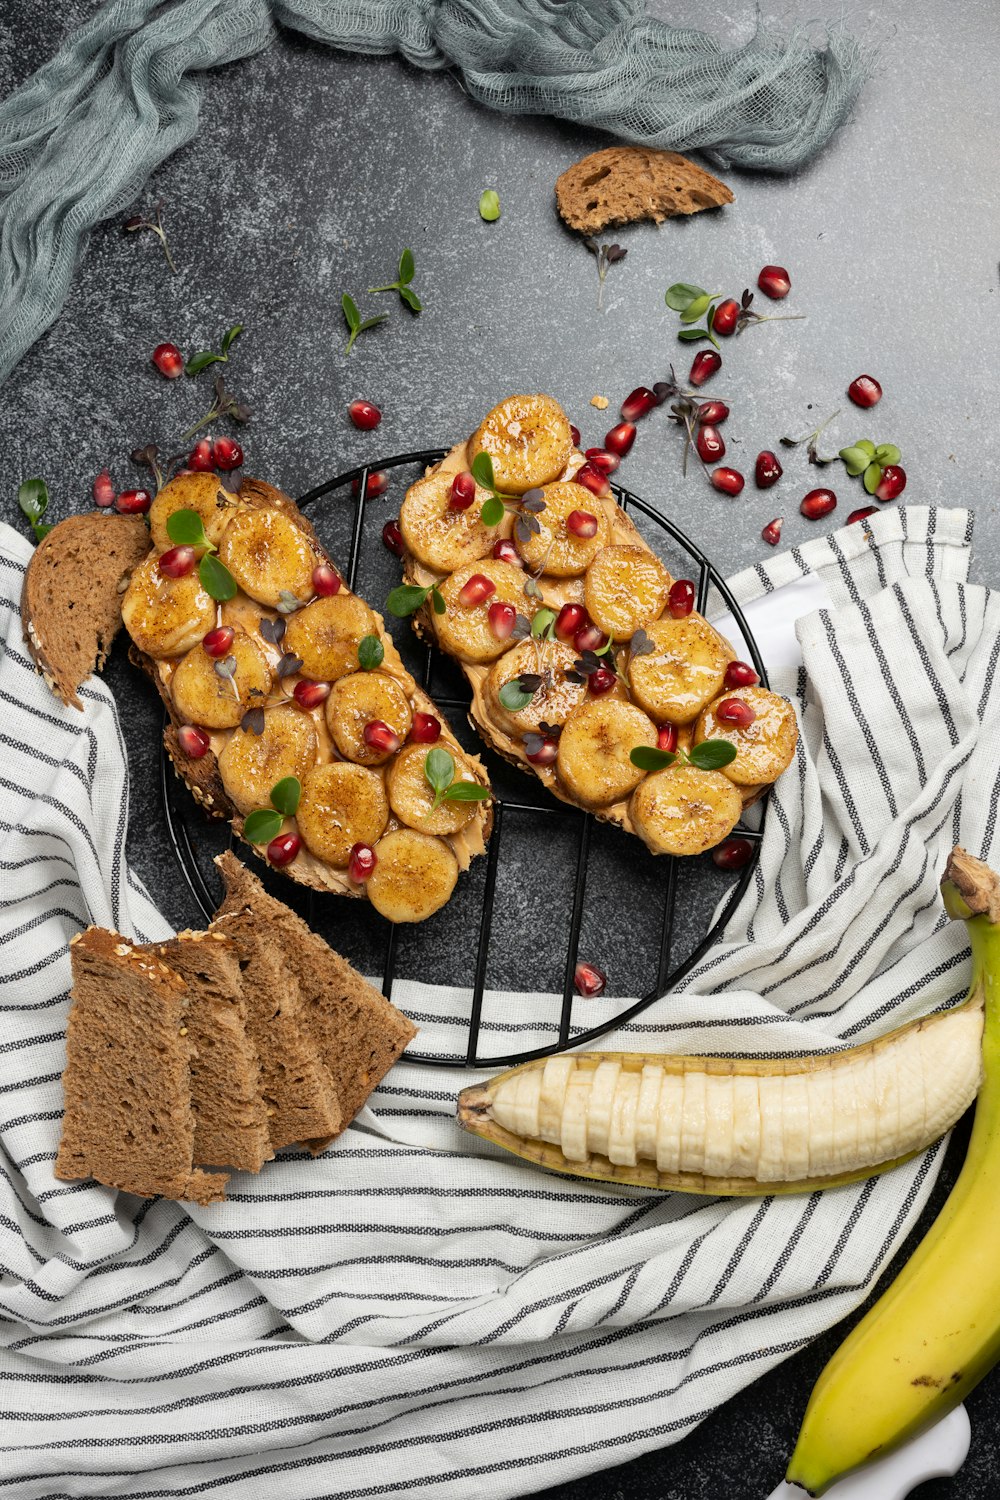 a plate of food with bananas, bread, and pomegranates